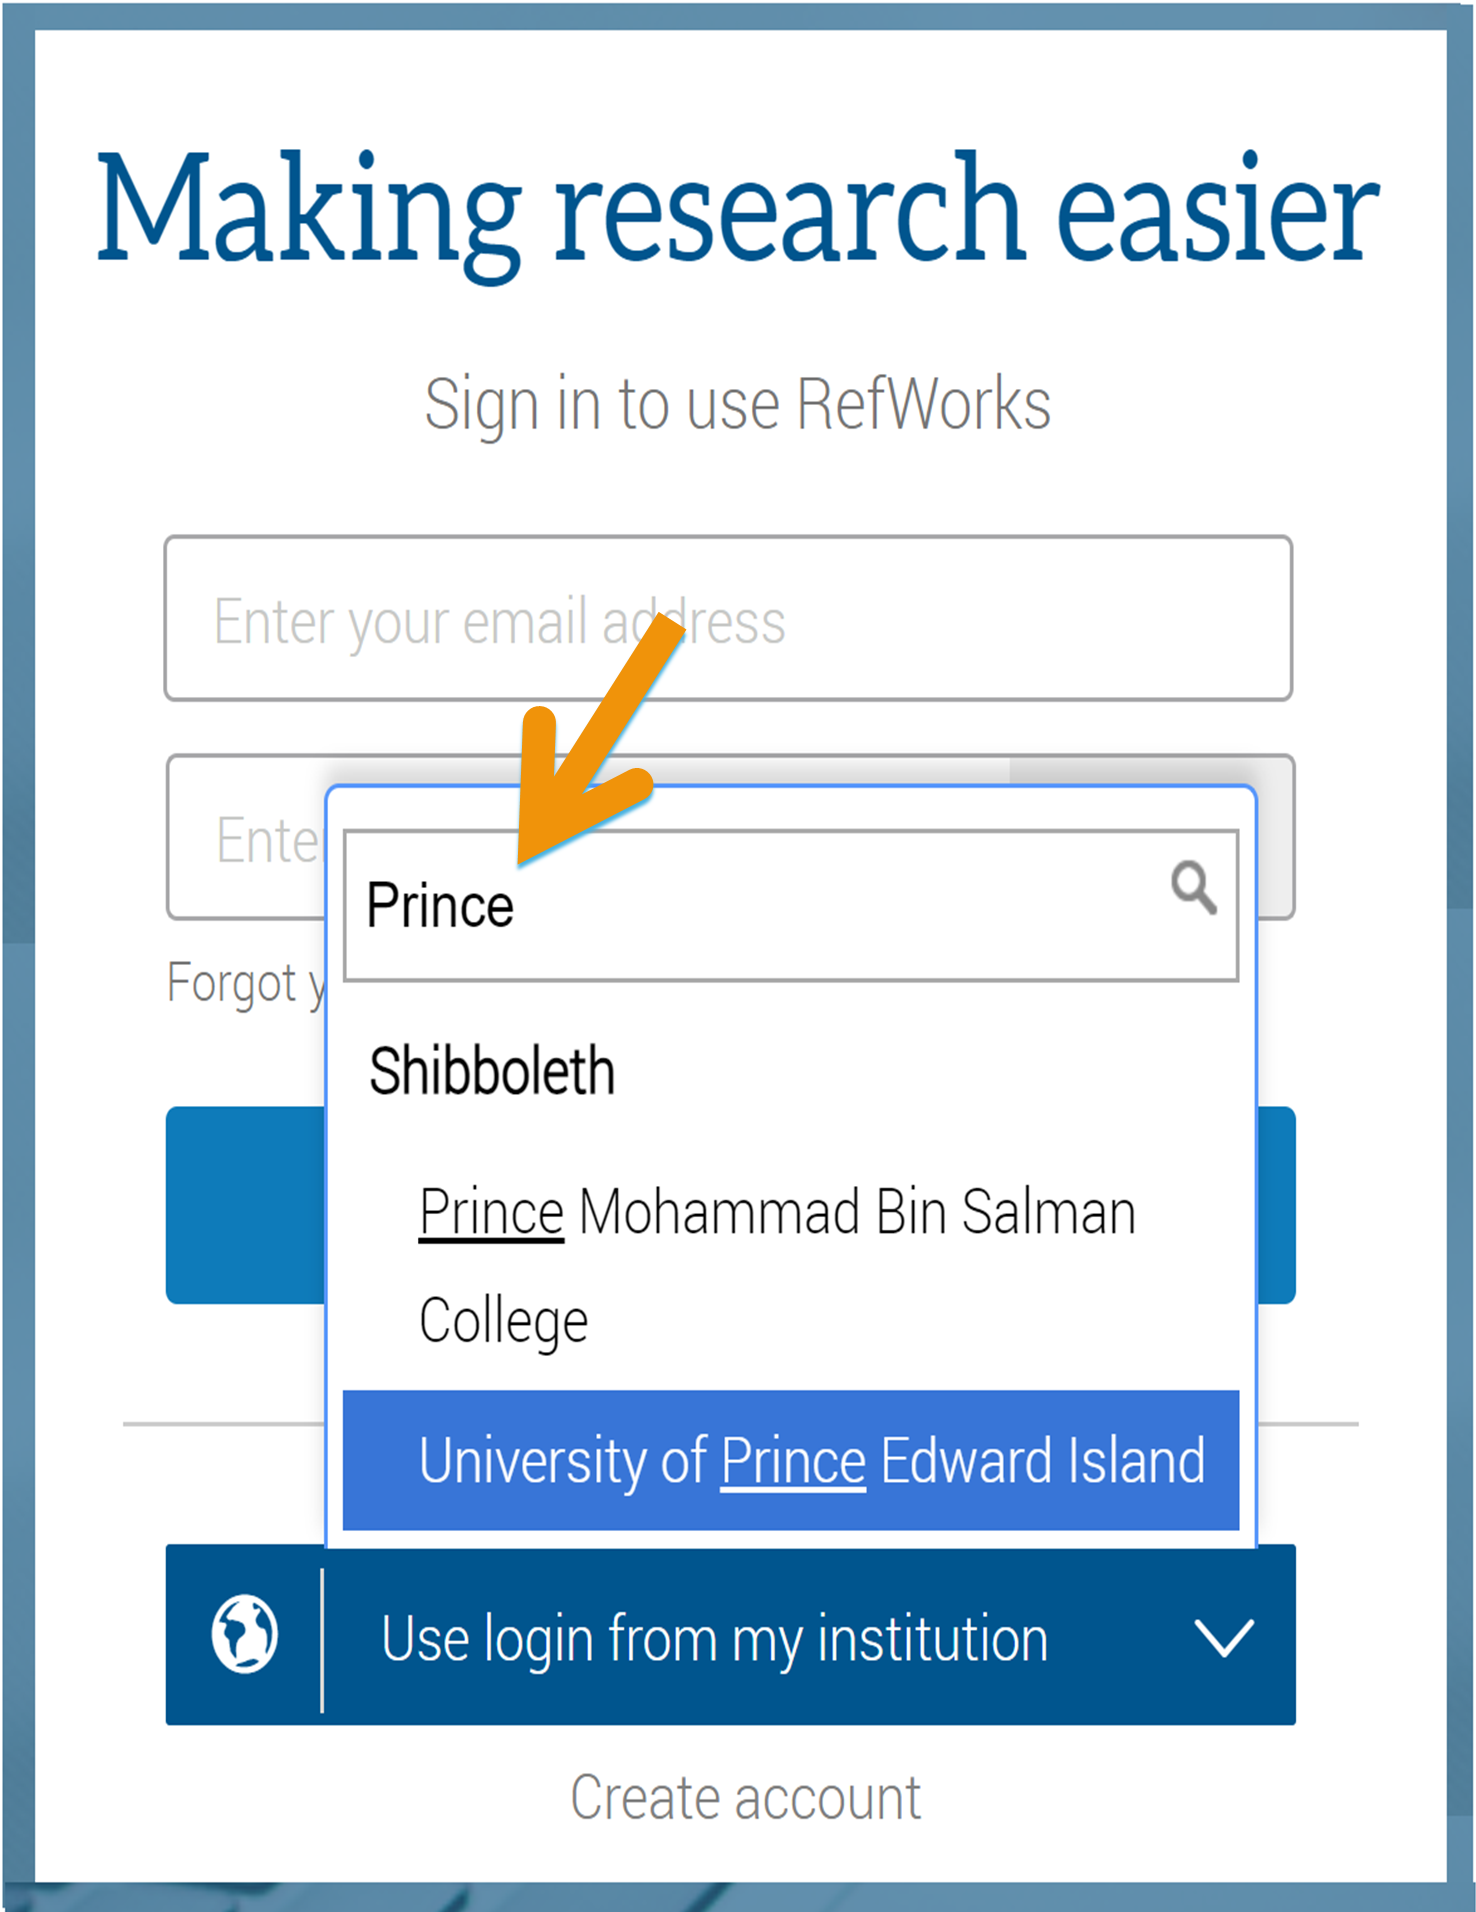 The link to Use Login from my institution is in blue button, above the Create account